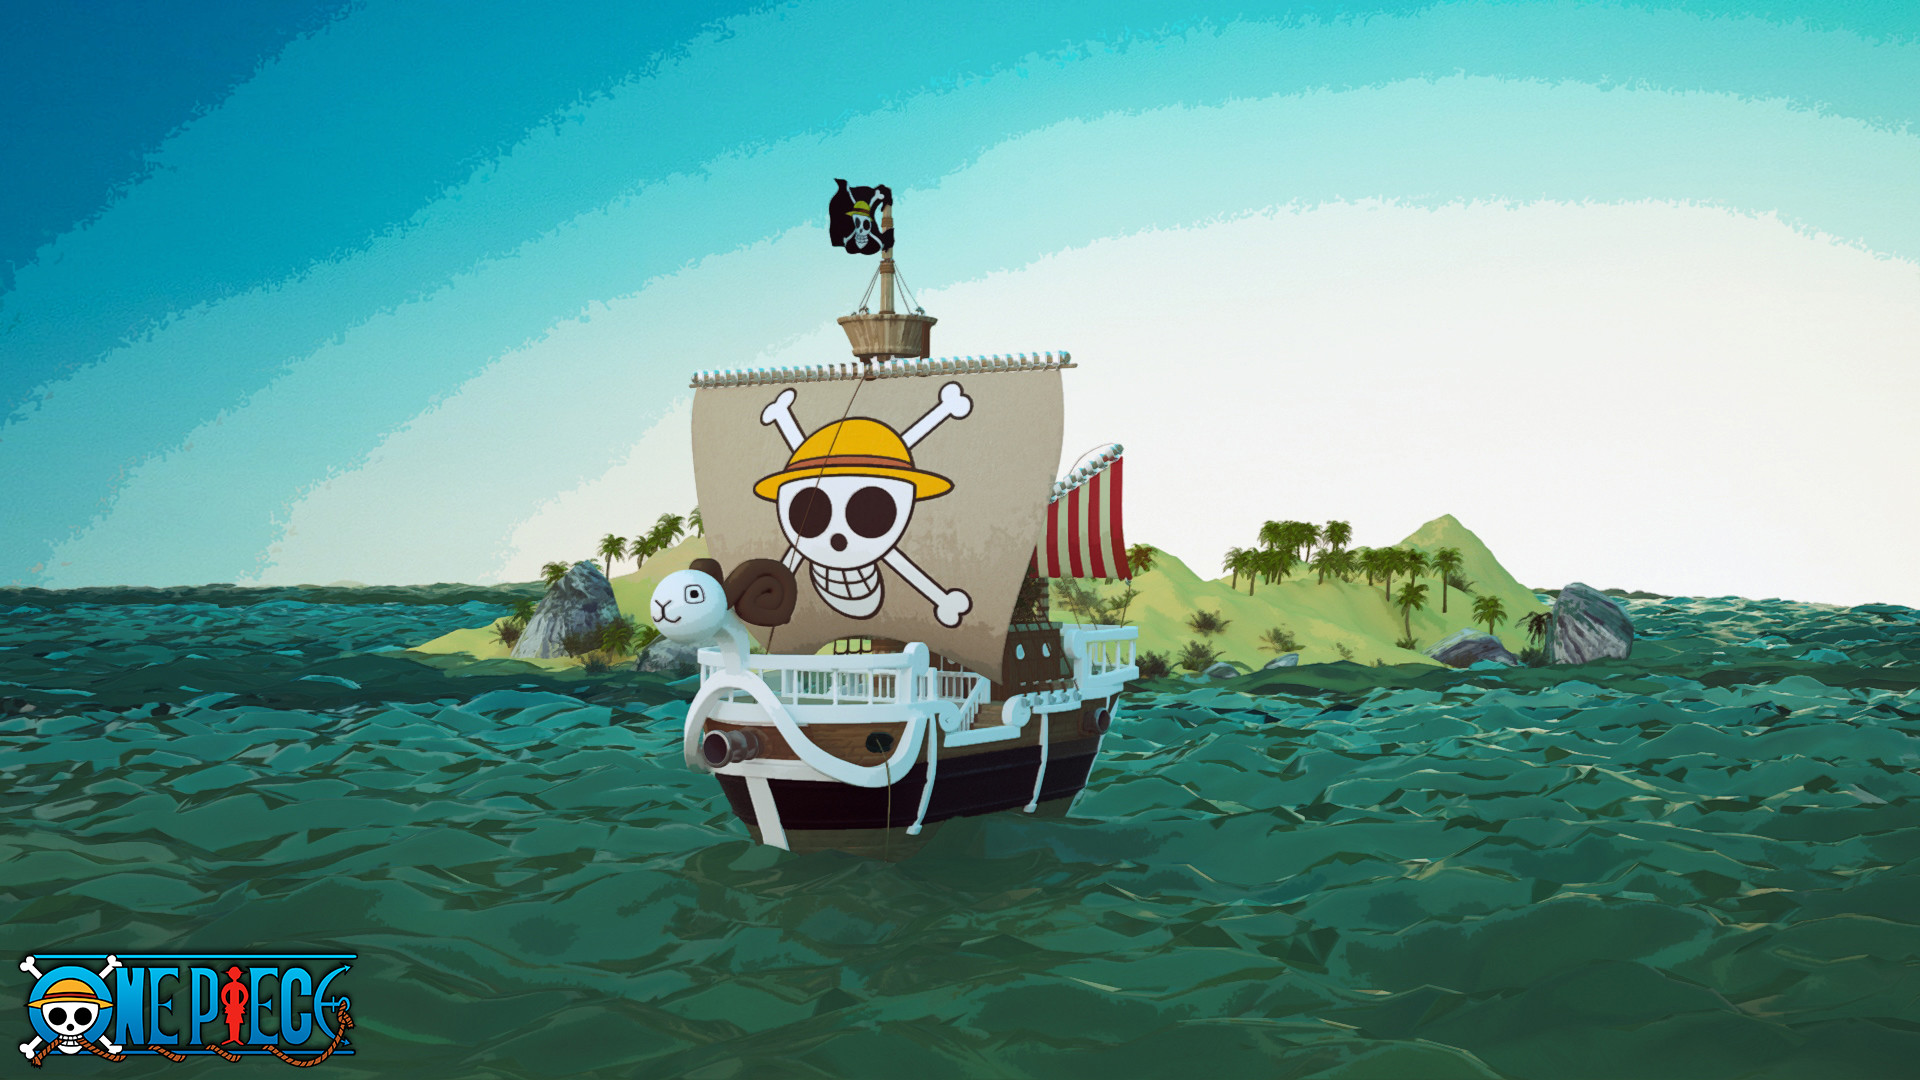 One Piece - Going Merry . . . . . . . . . . . . . . #onepiece